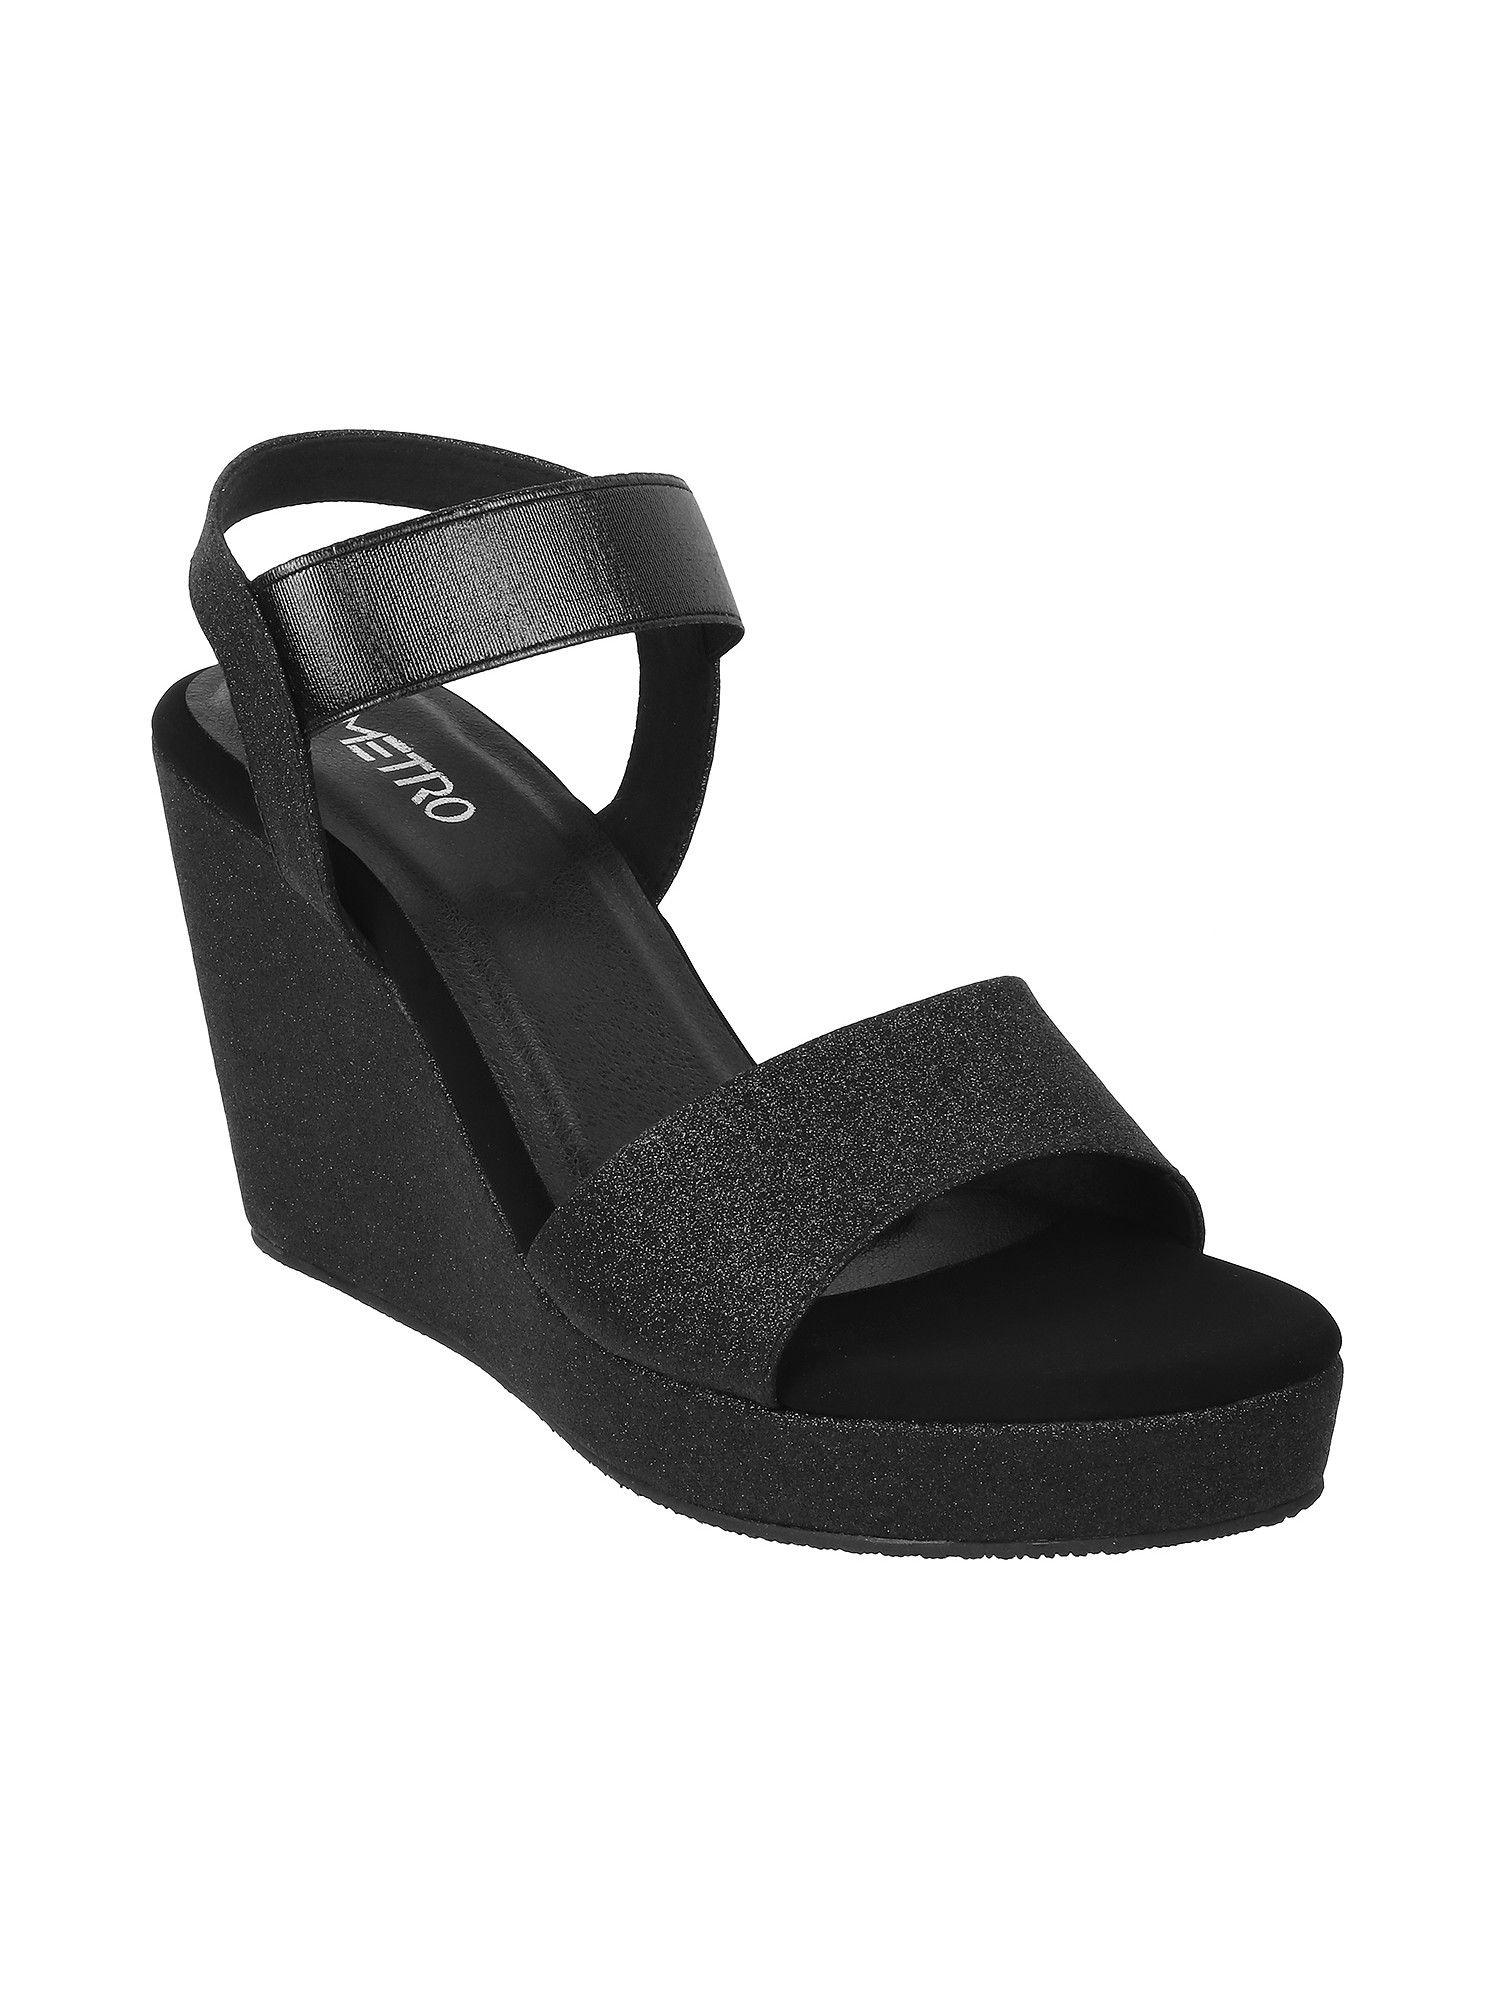 black-synthetic-embellished/sequined-women-wedges